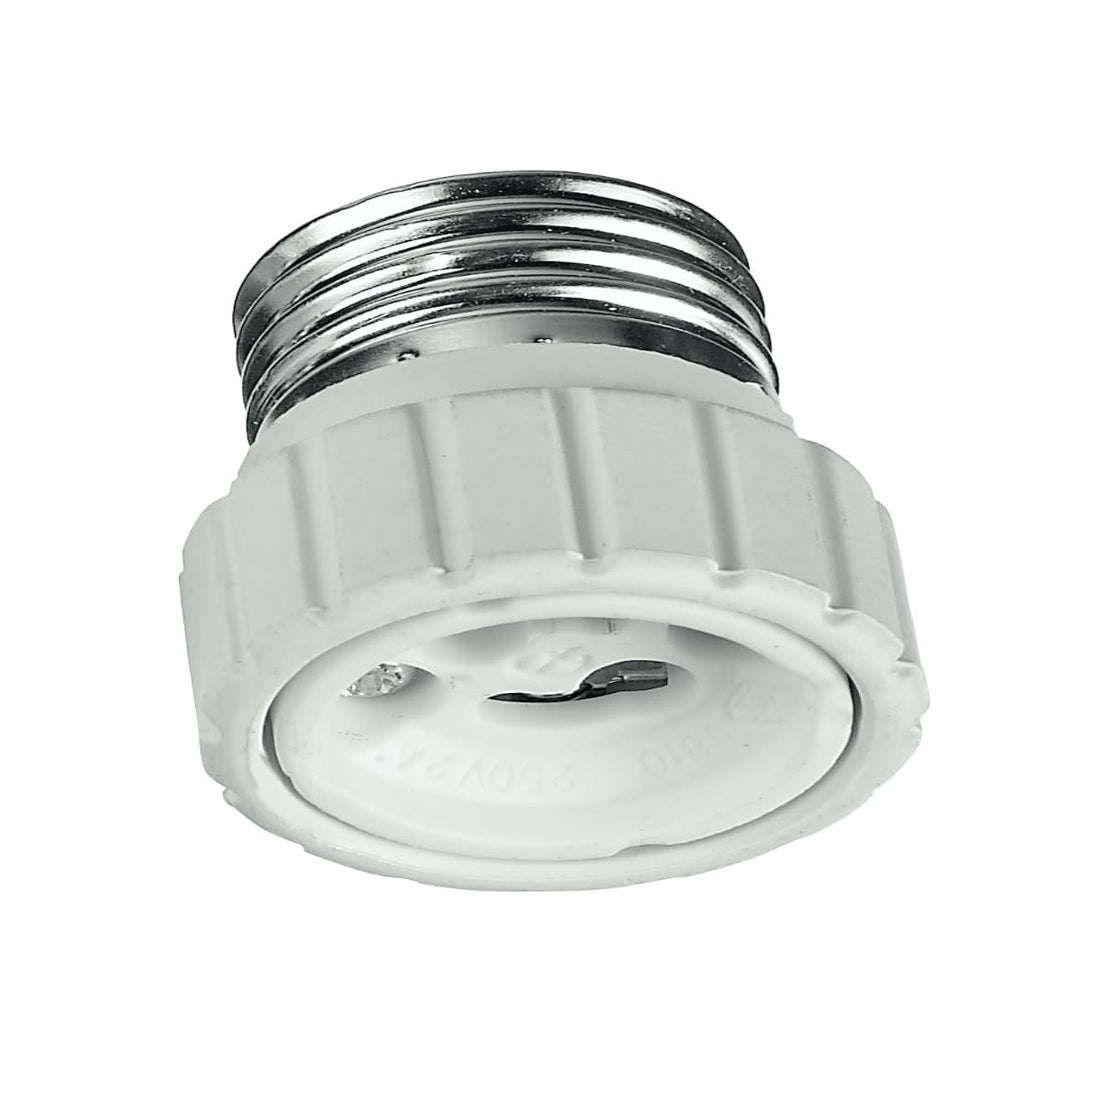 ADAPTER FOR E27 TO GU10 LAMPS - best price from Maltashopper.com BR420000238